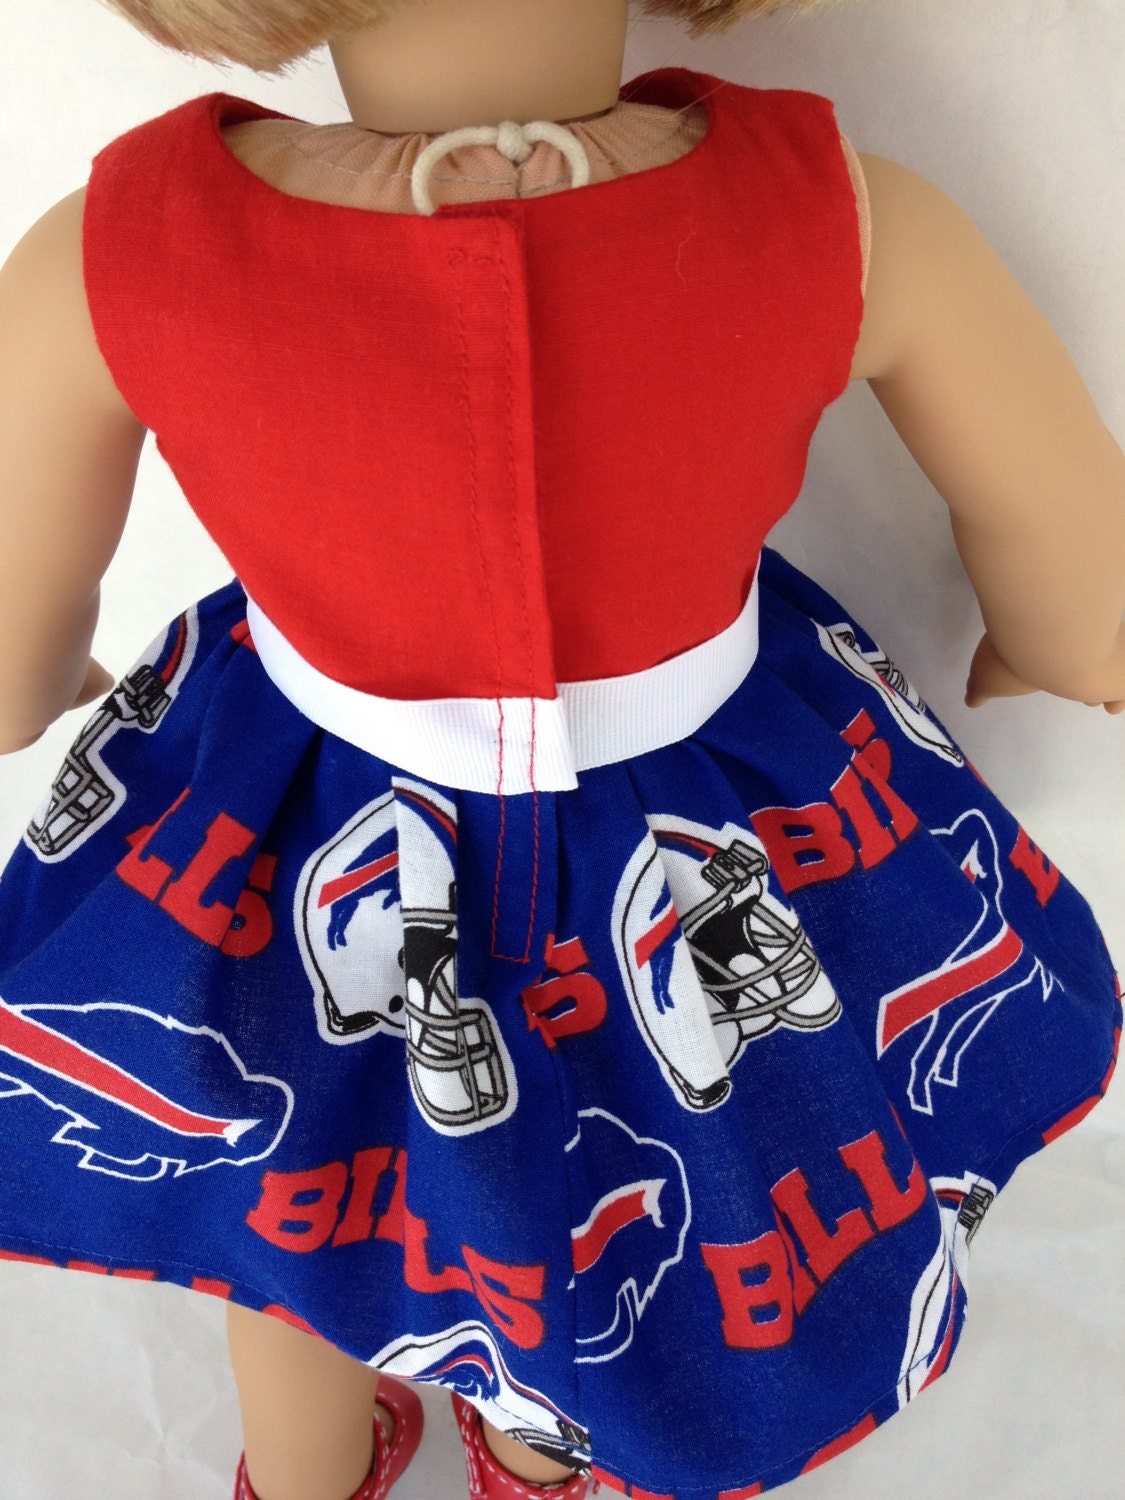 Buffalo Bills 18 Inch Doll Game Day Dress, Made to Fit 18 Inch Dolls Such  as American Girl and Similar 18 Inch Dolls 